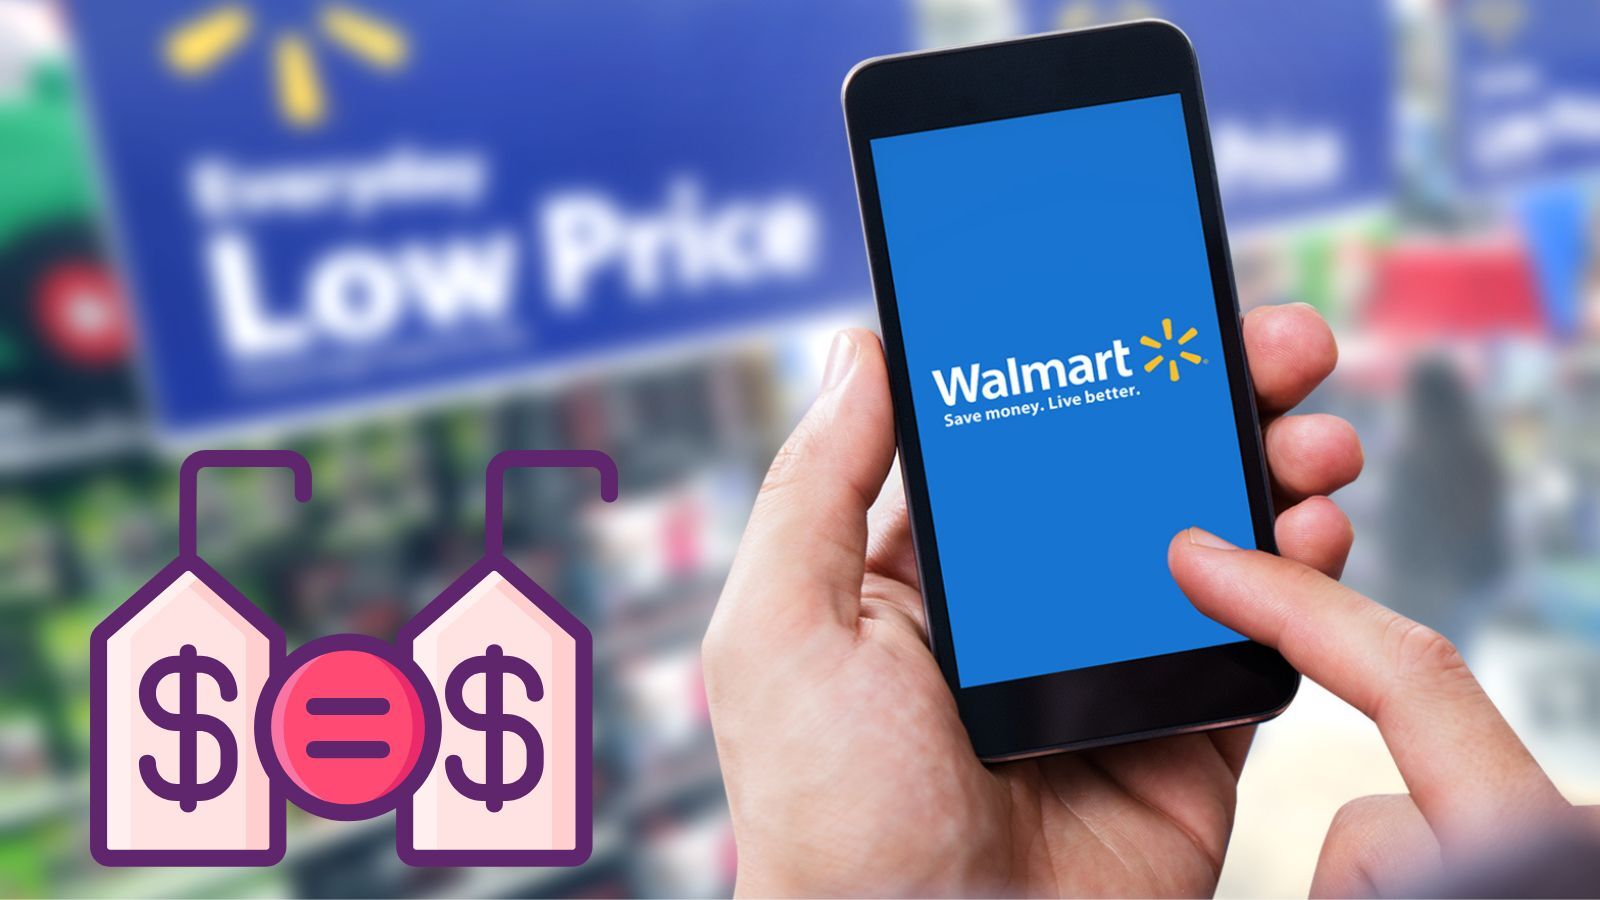 Does Walmart Price Match Other Walmarts? (Here Is What You Need to Know)